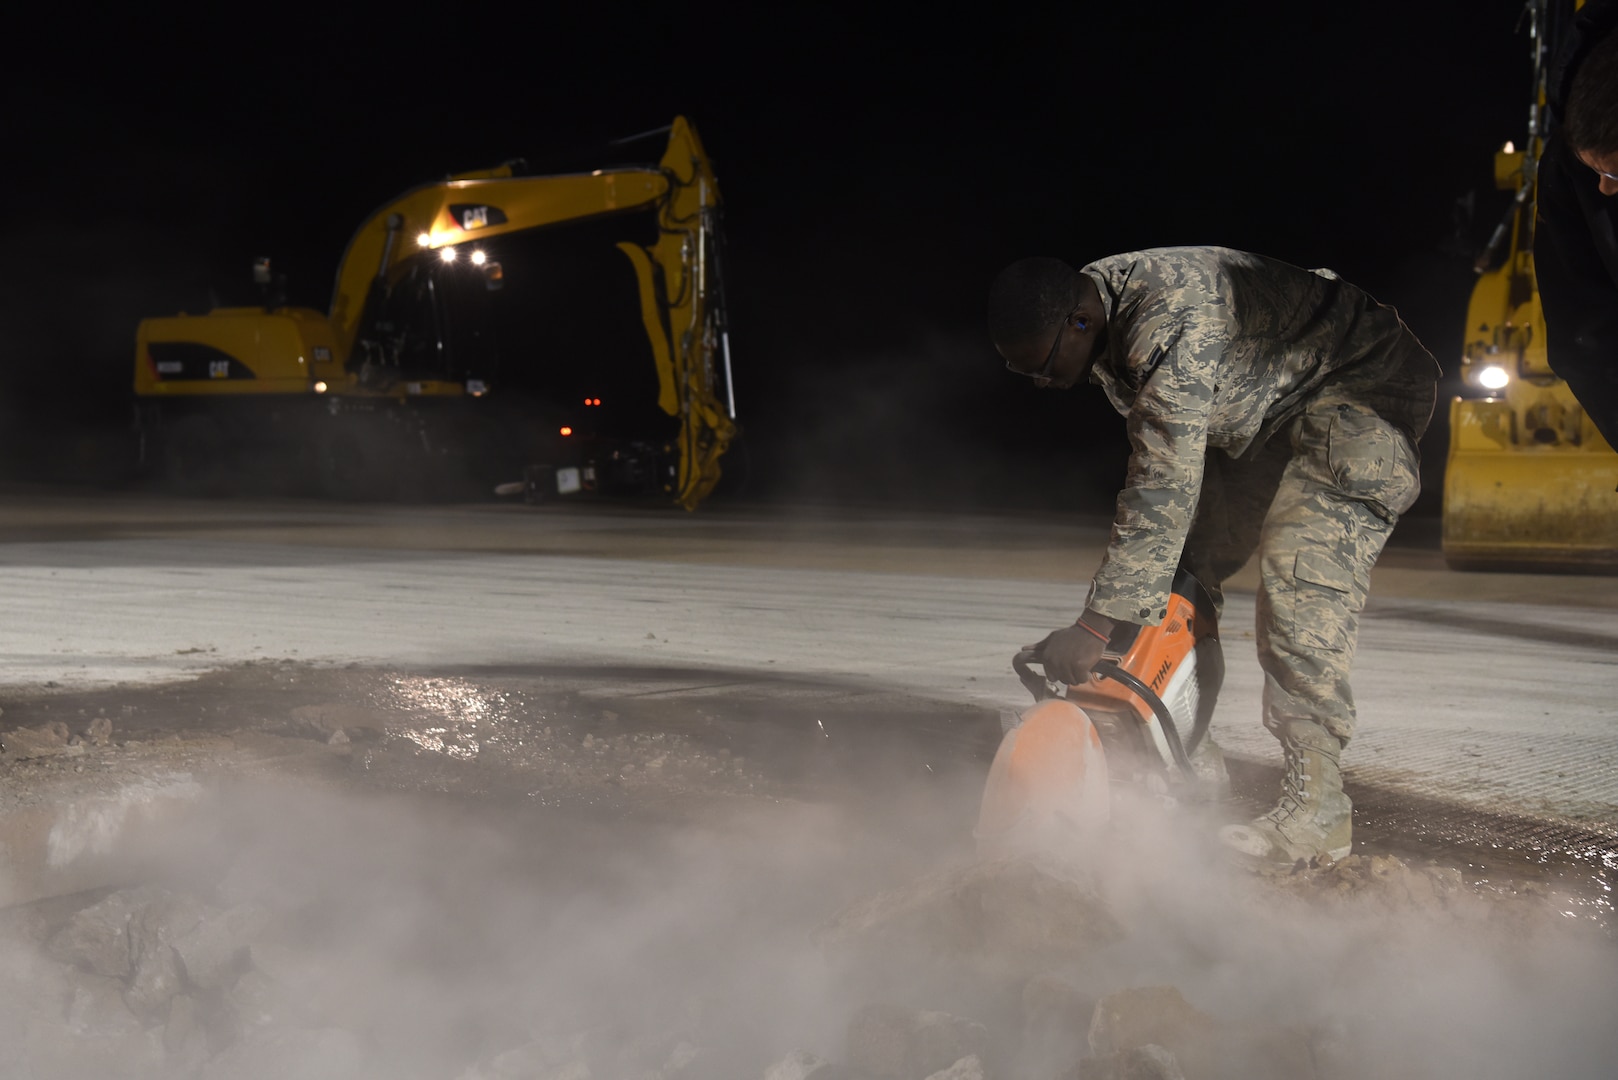 U.S. Air Force Airman 1st Class Curtis Carroll III, 8th Civil Engineer Squadron dirt boy, saws through cement at Kunsan Air Base, Republic of Korea, May 1, 2019. Carroll and other 8th CES members applied rapid airfield damage repair to quickly fix a rupture that damaged the flight line. (U.S. Air Force photo by Staff Sgt. Joshua Edwards)